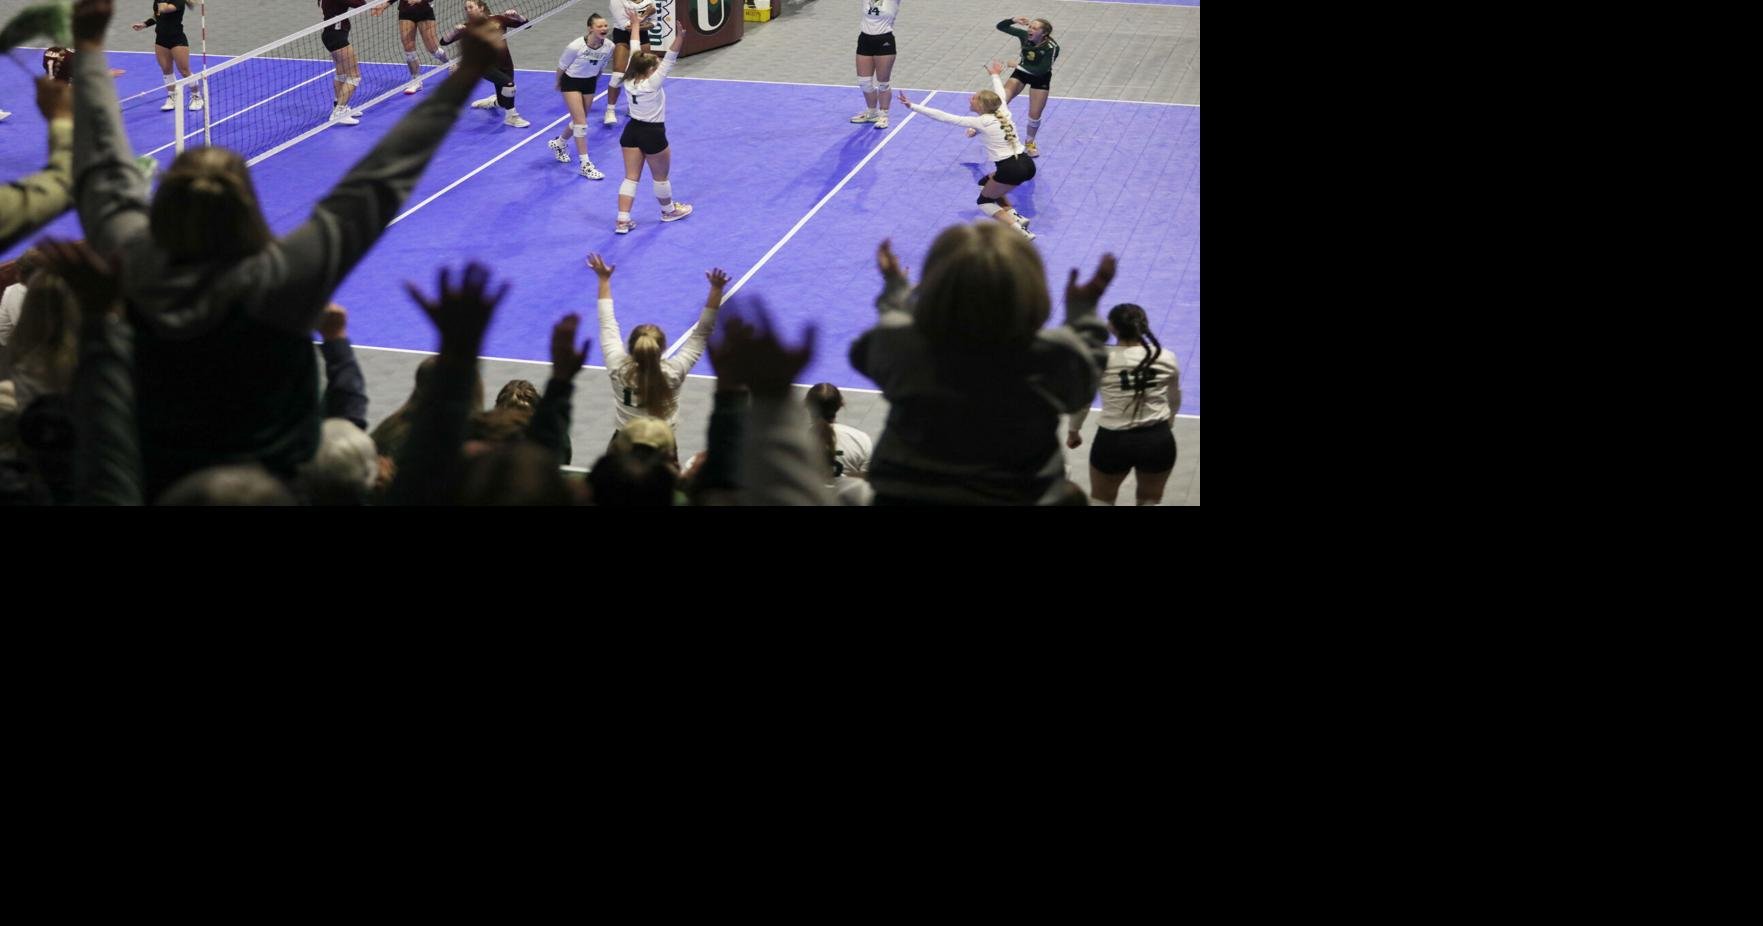 PHOTOS: Friday at the Wyoming State High School Volleyball Championships